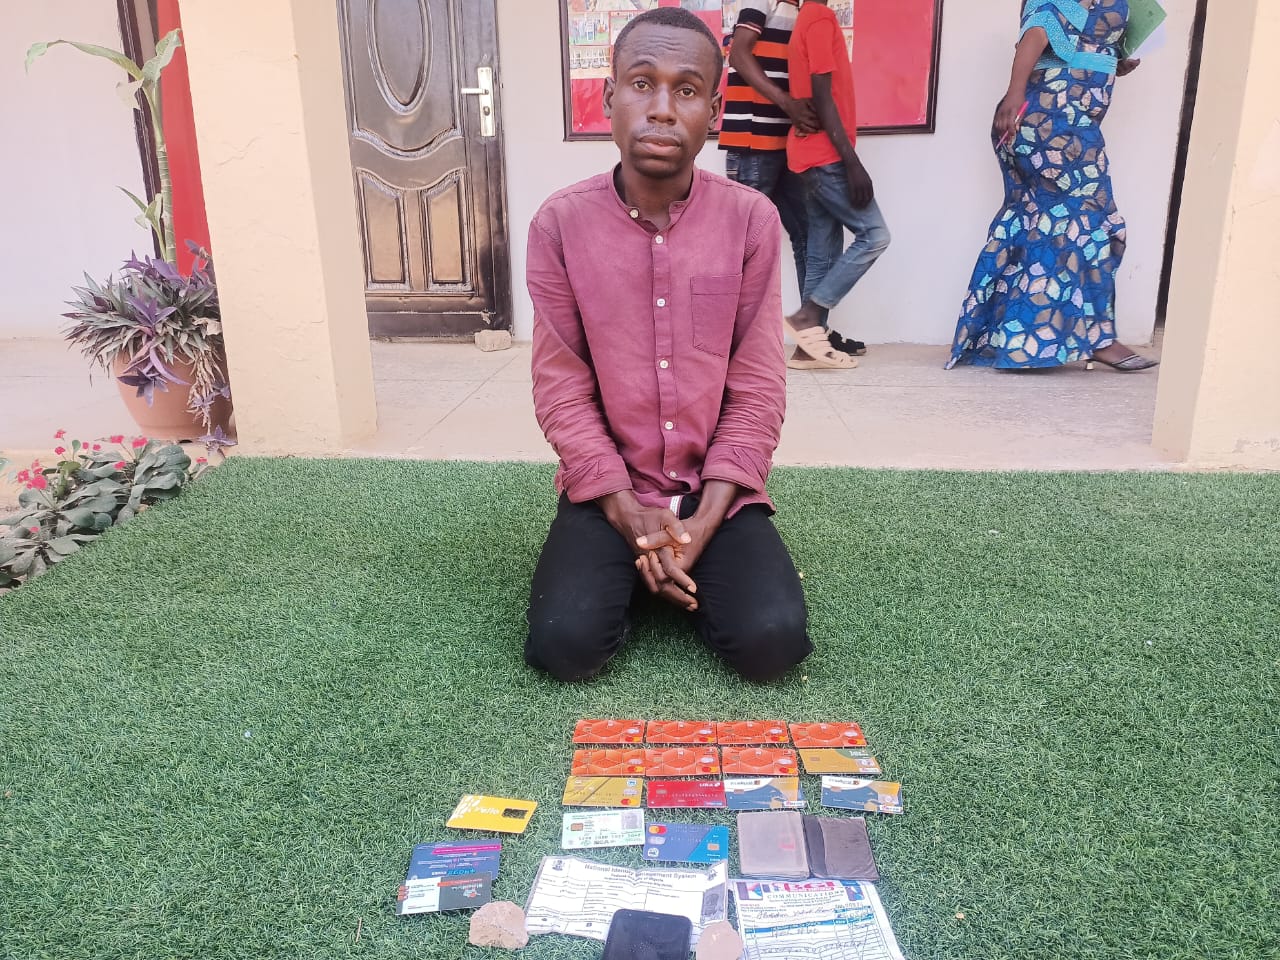 Man arrested with 13 stolen ATM cards in Adamawa